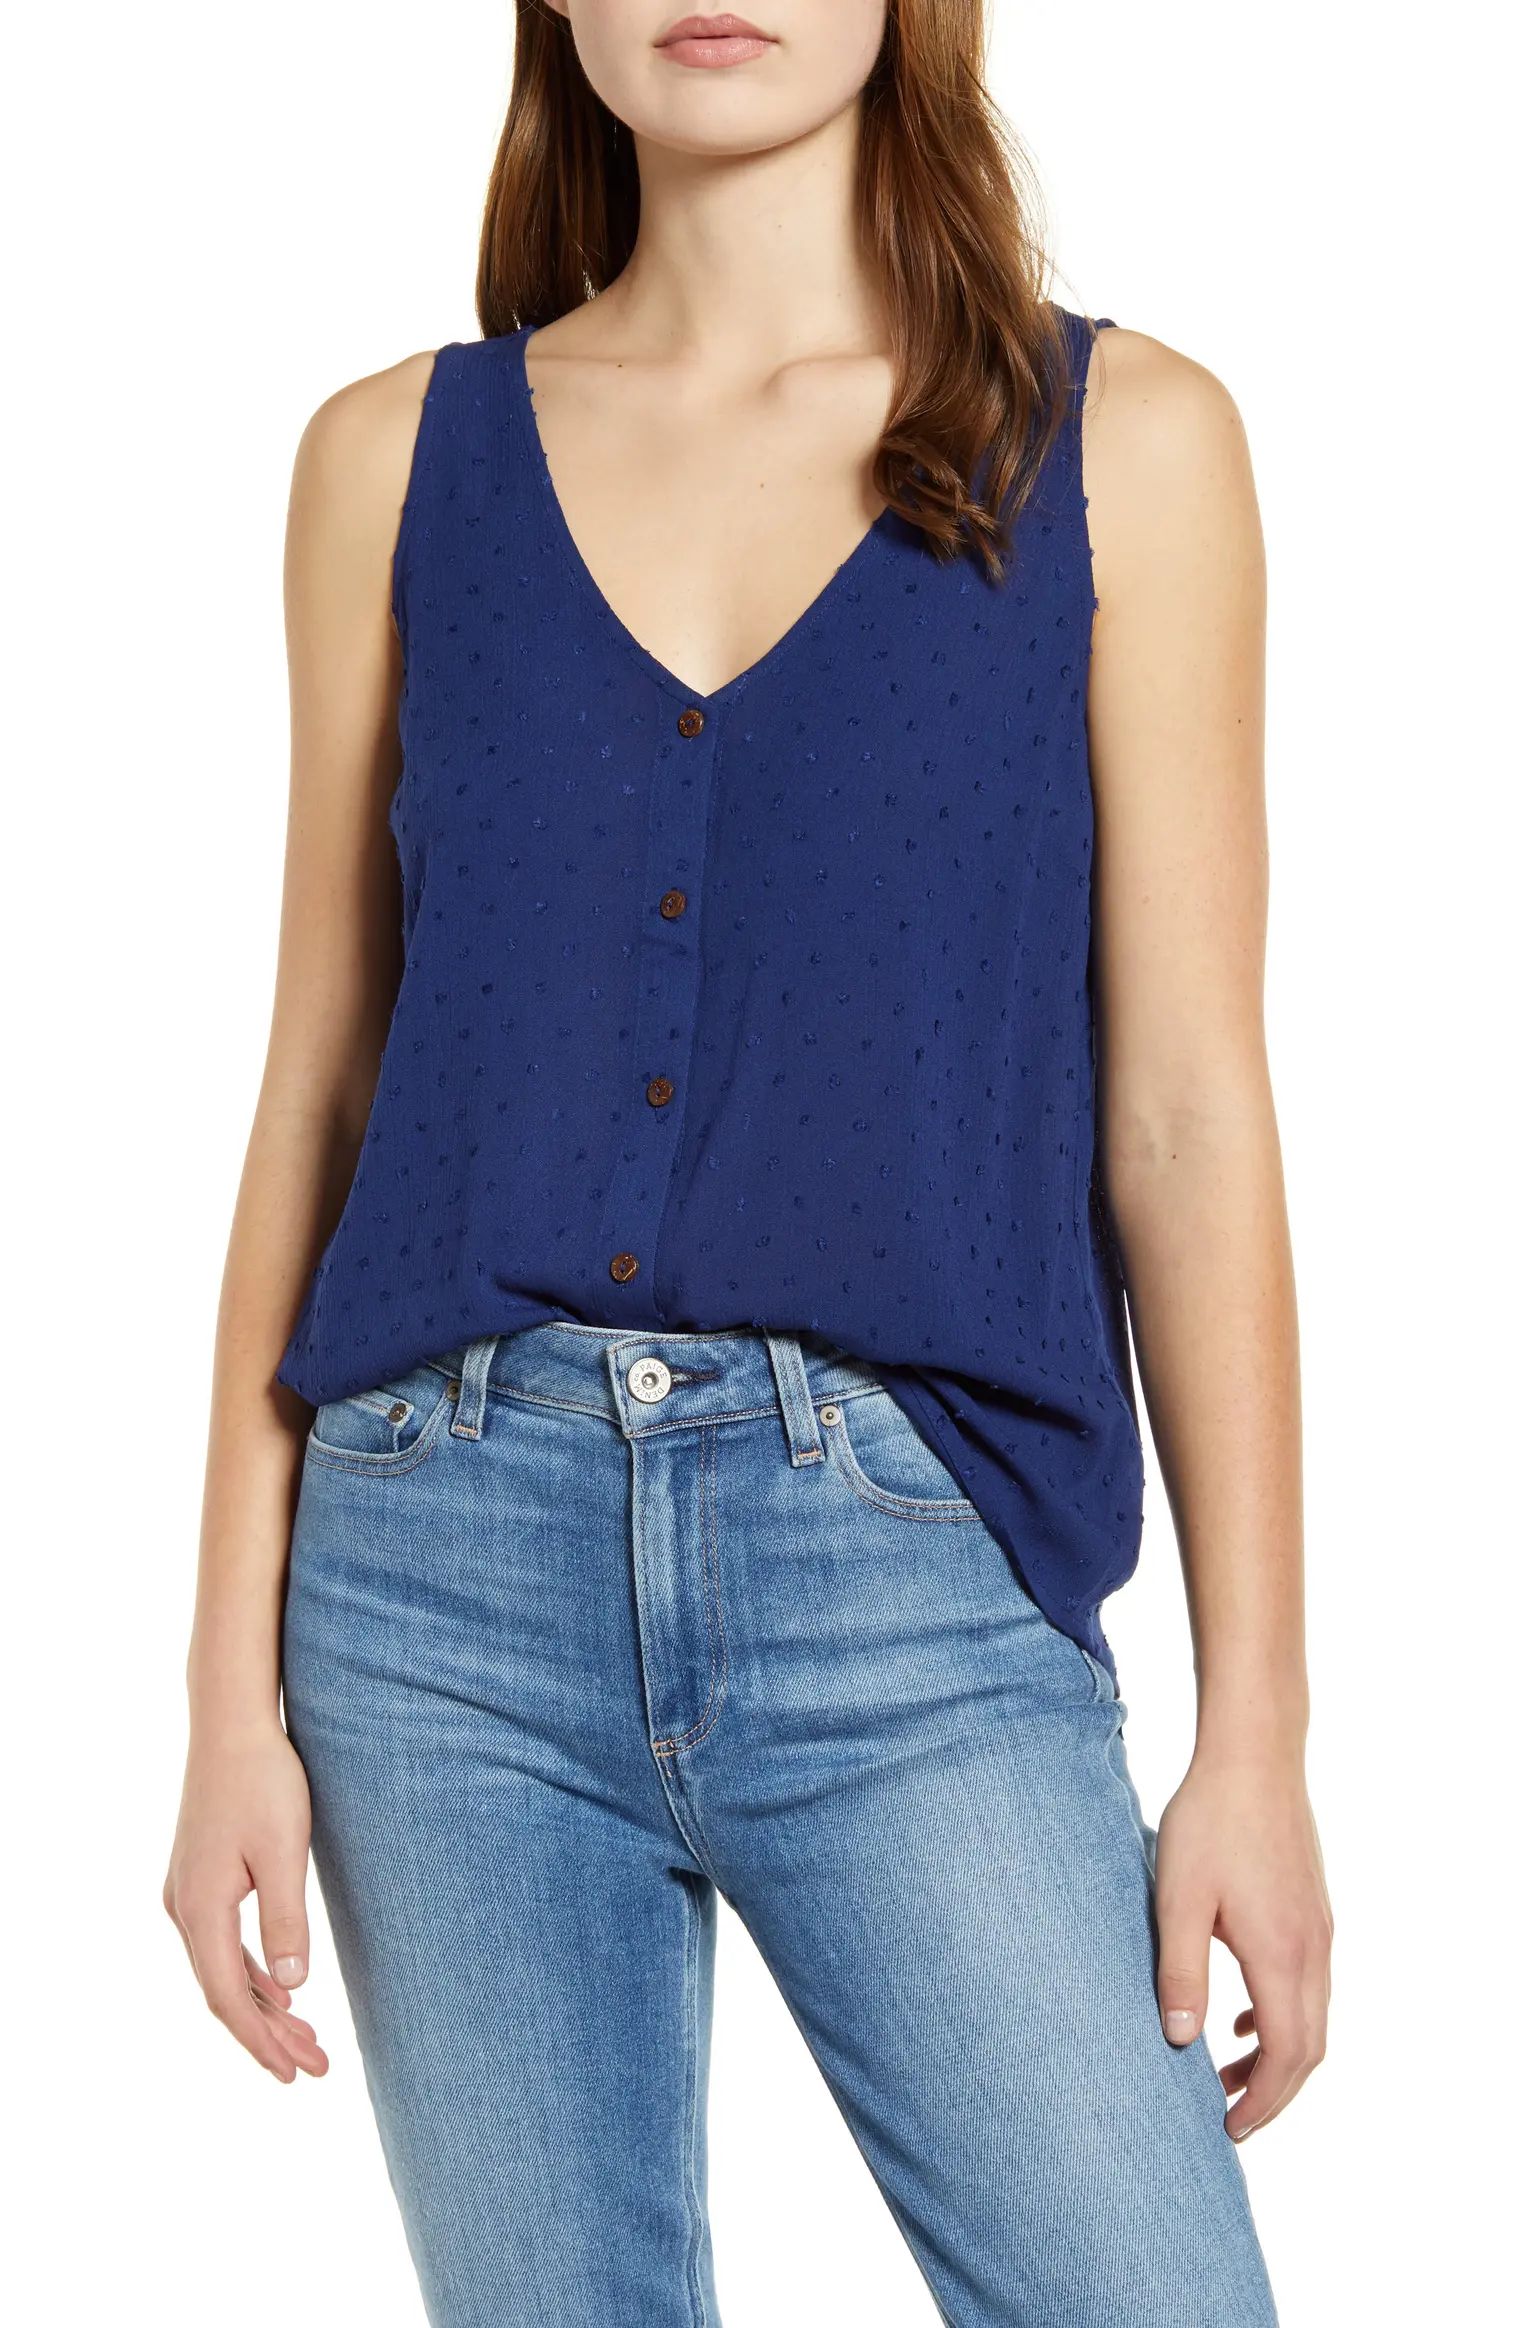 x The Motherchic Isle Button-Up Tank | Nordstrom